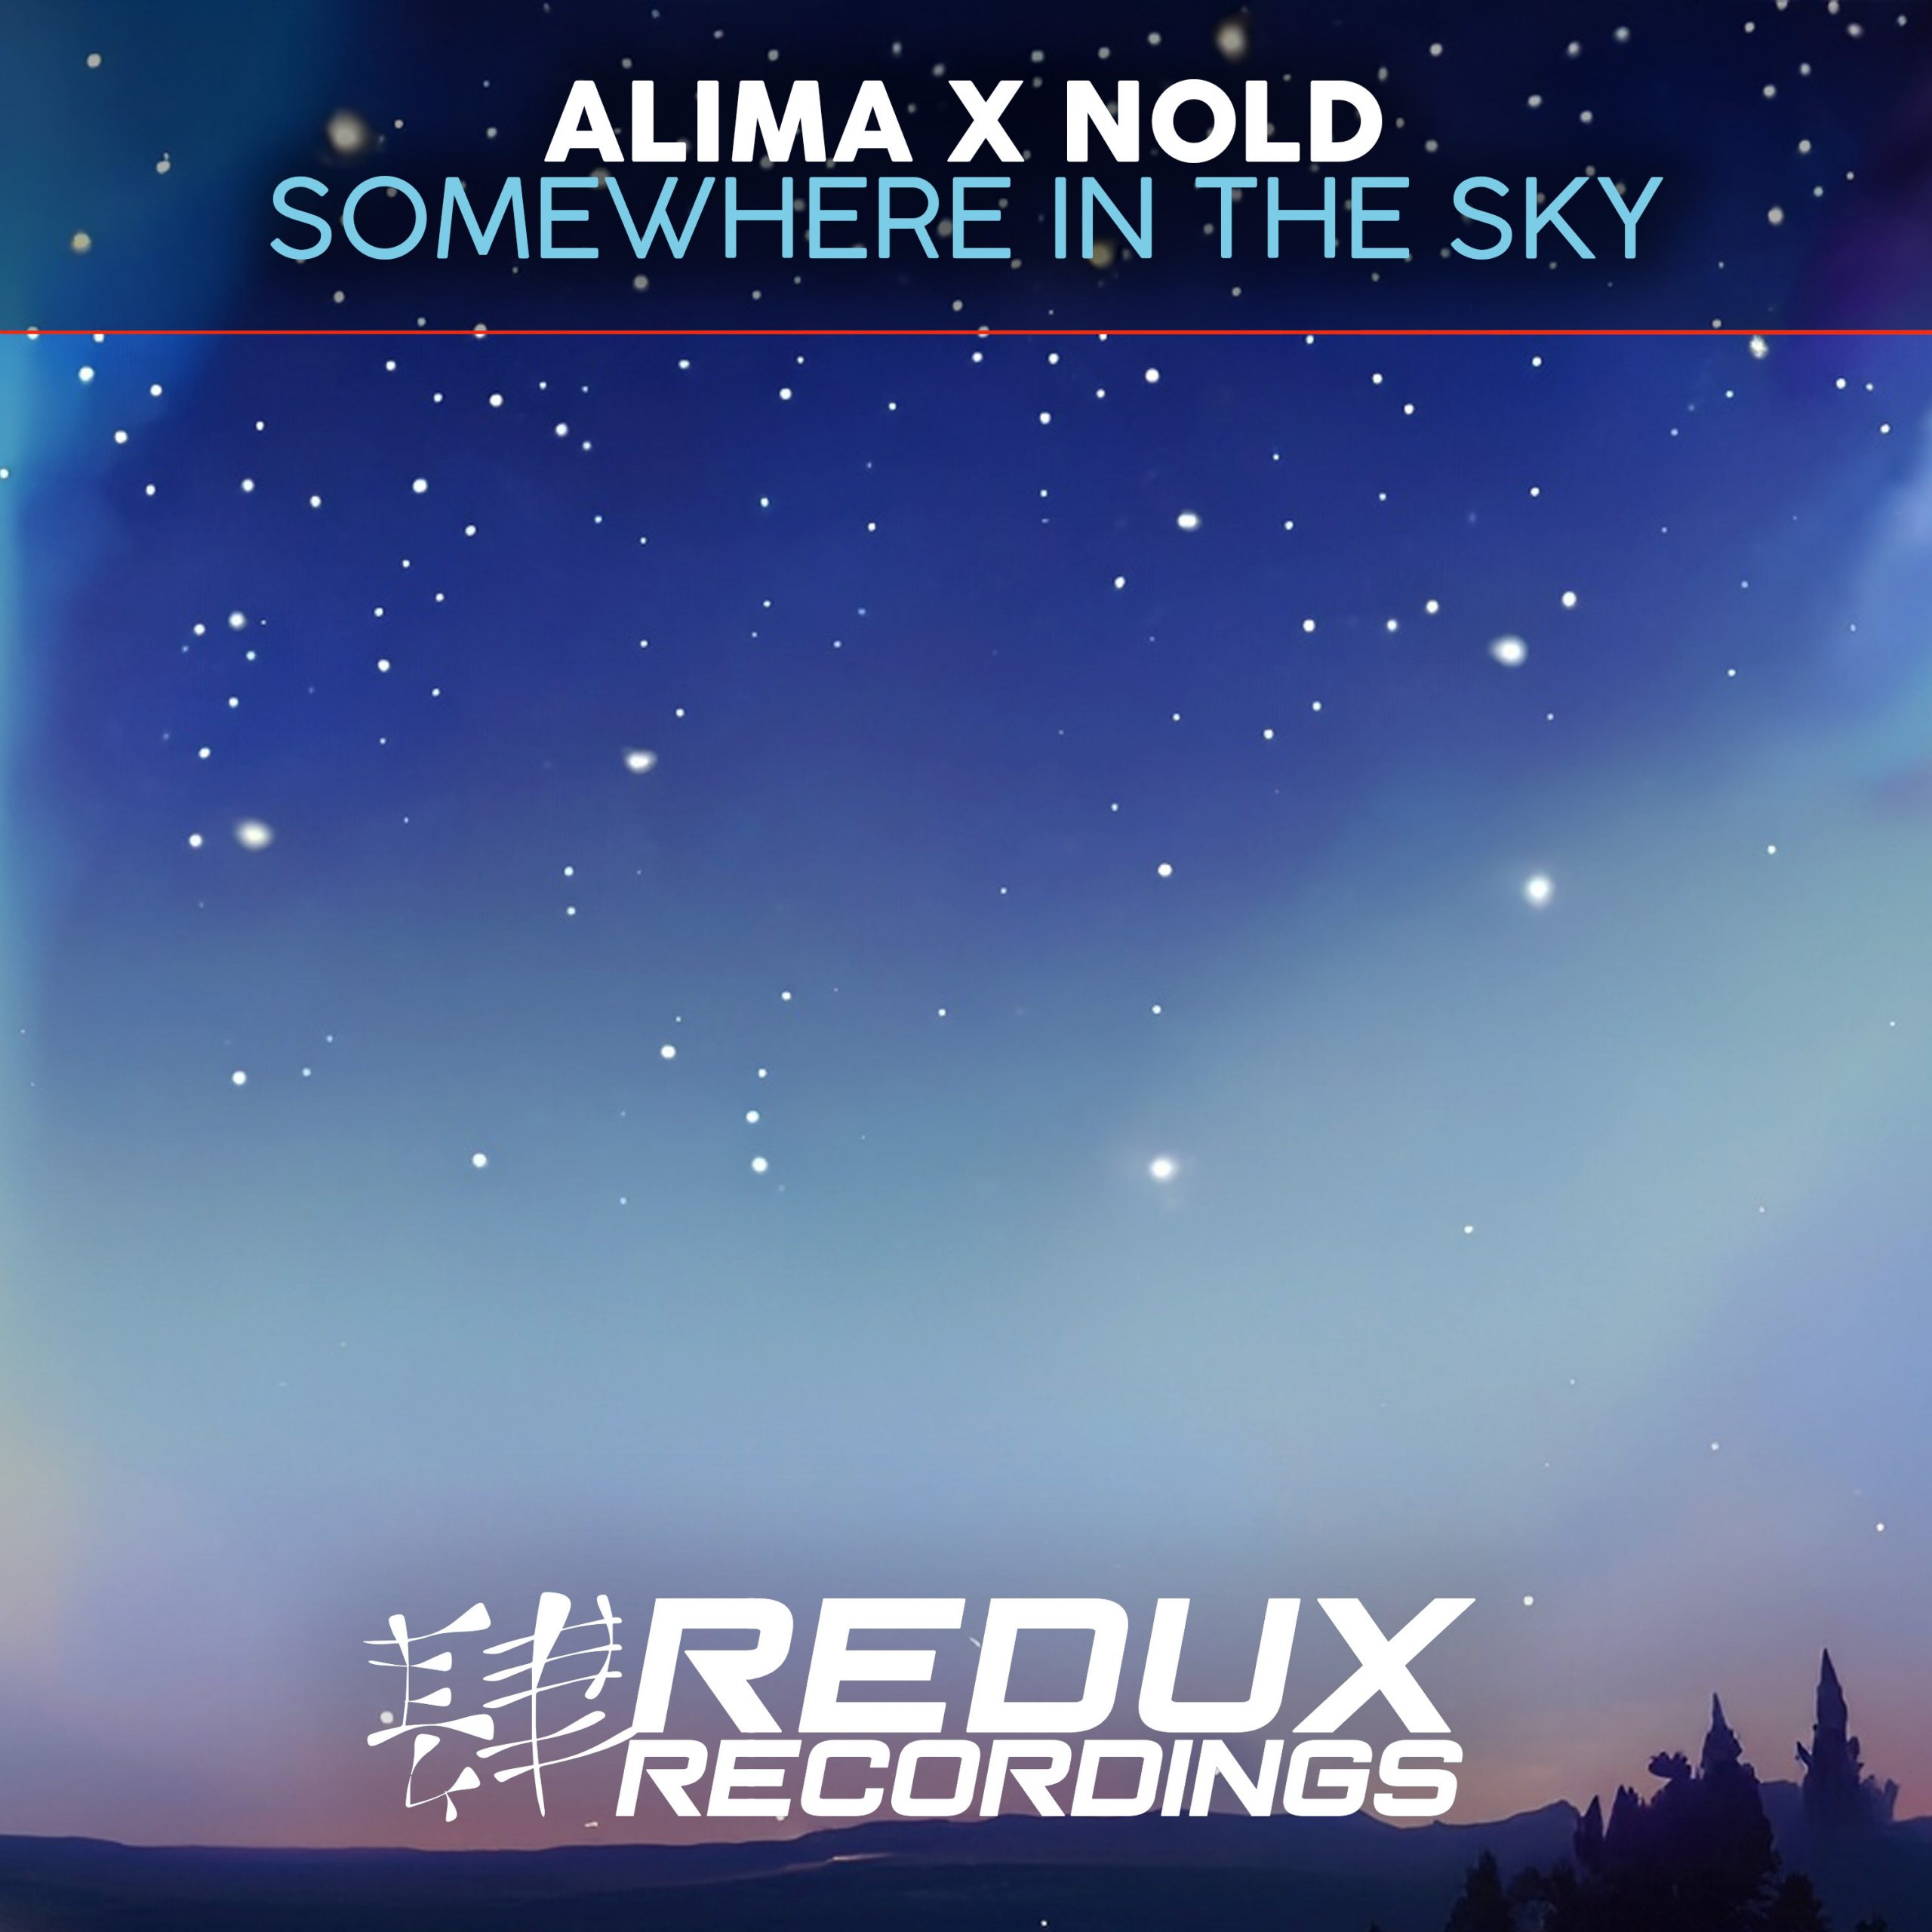 Alima X Nold - Somewhere in the Sky - REDUX RECORDINGS Cover Artwork